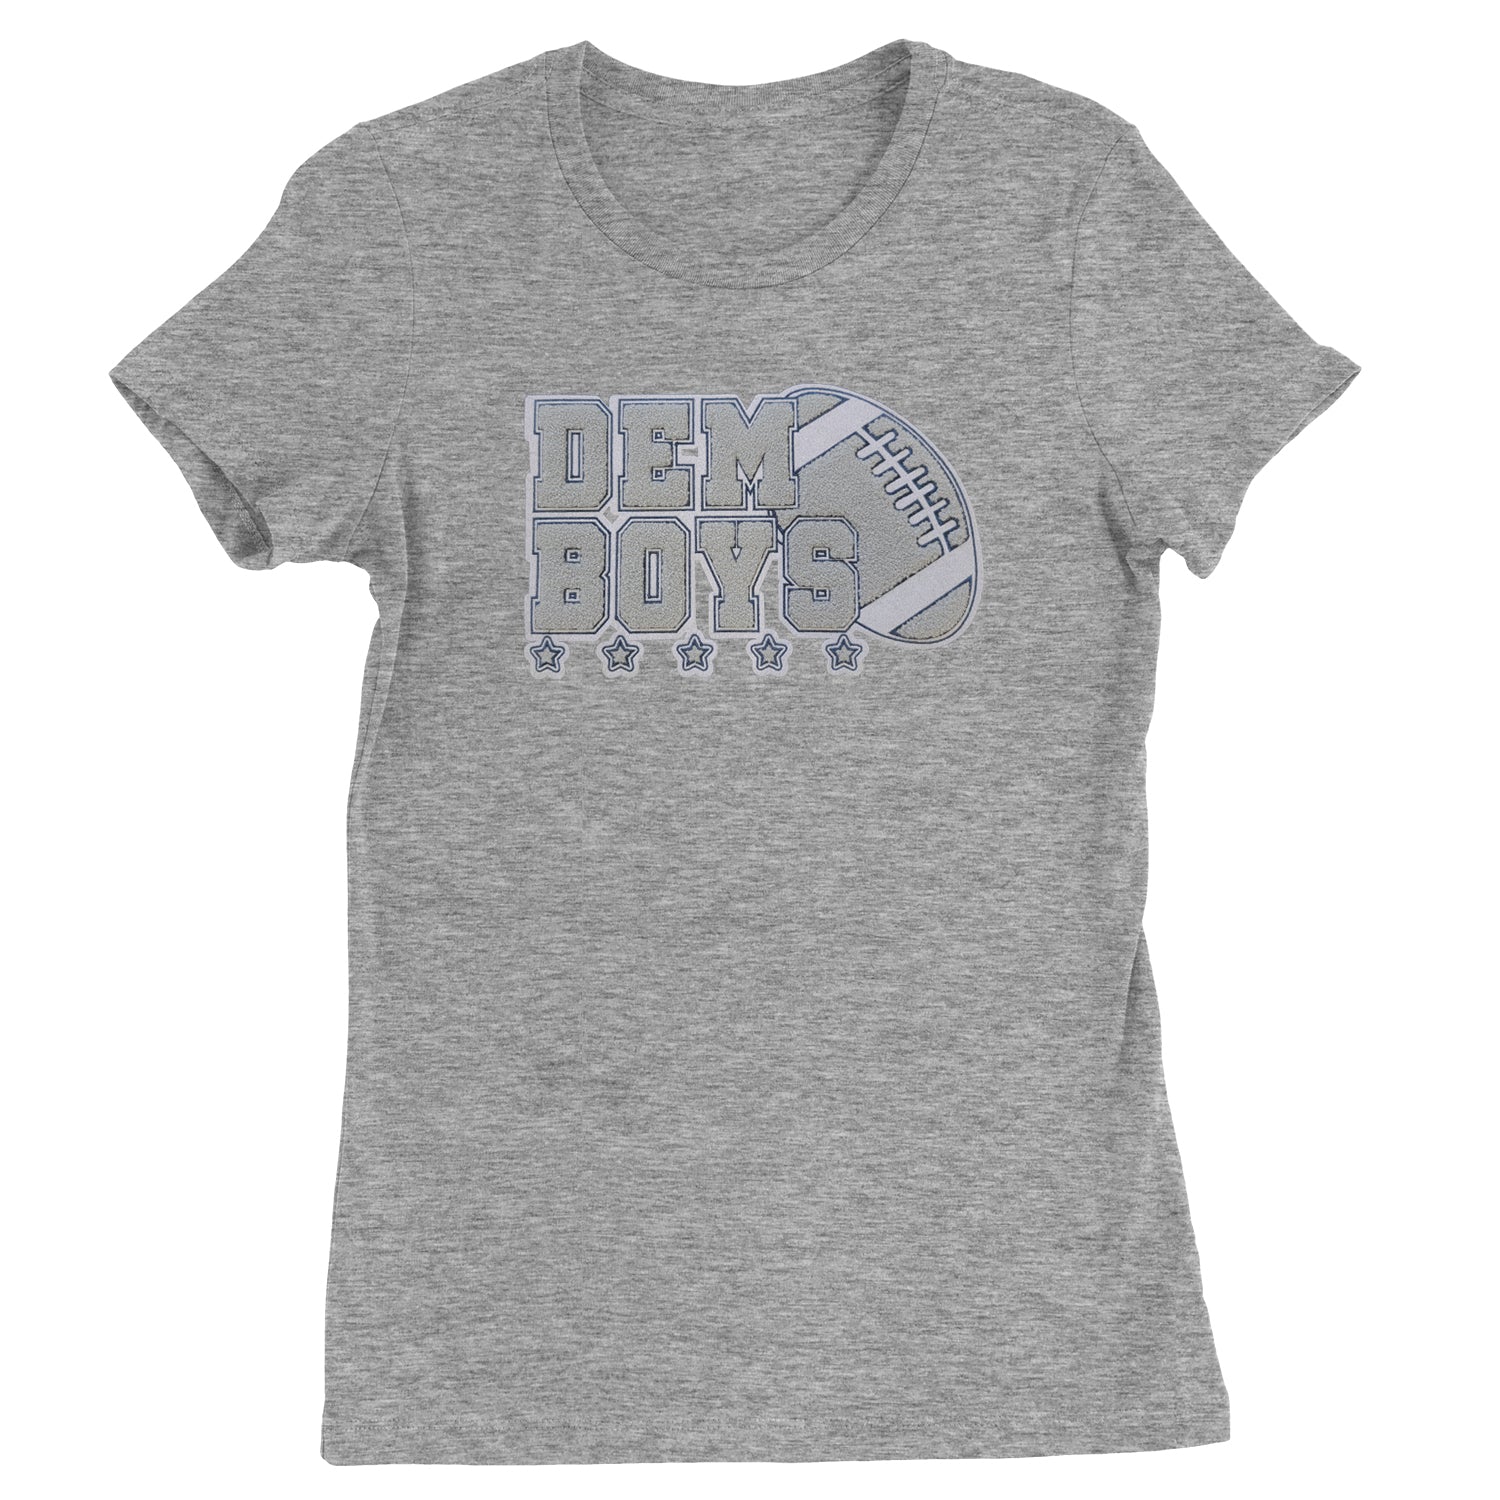 Dem Boys Embroidered Patch 2 Womens T-shirt dallas, fan, jersey, team, texas by Expression Tees